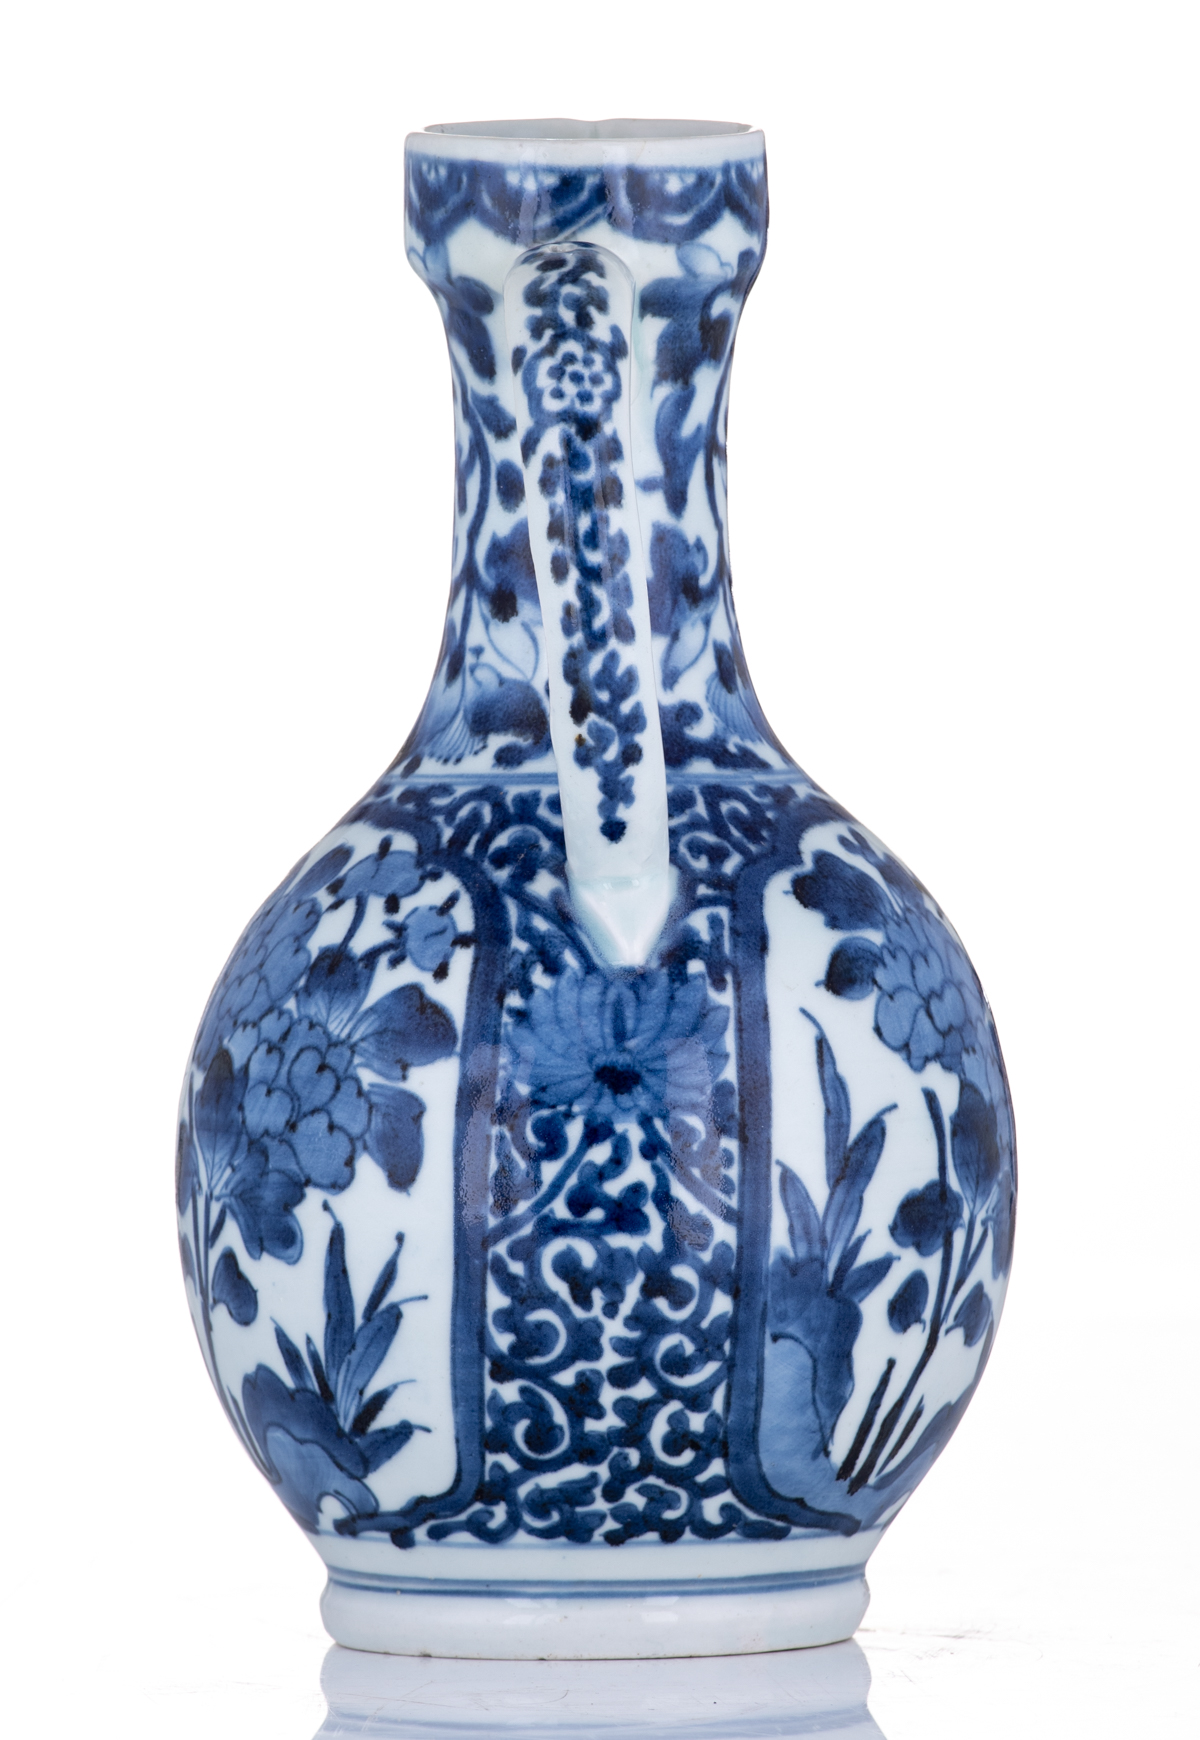 A Japanese last quarter of the 17thC Arita jug, with blue and white scrollwork all over, and roundel - Image 5 of 8